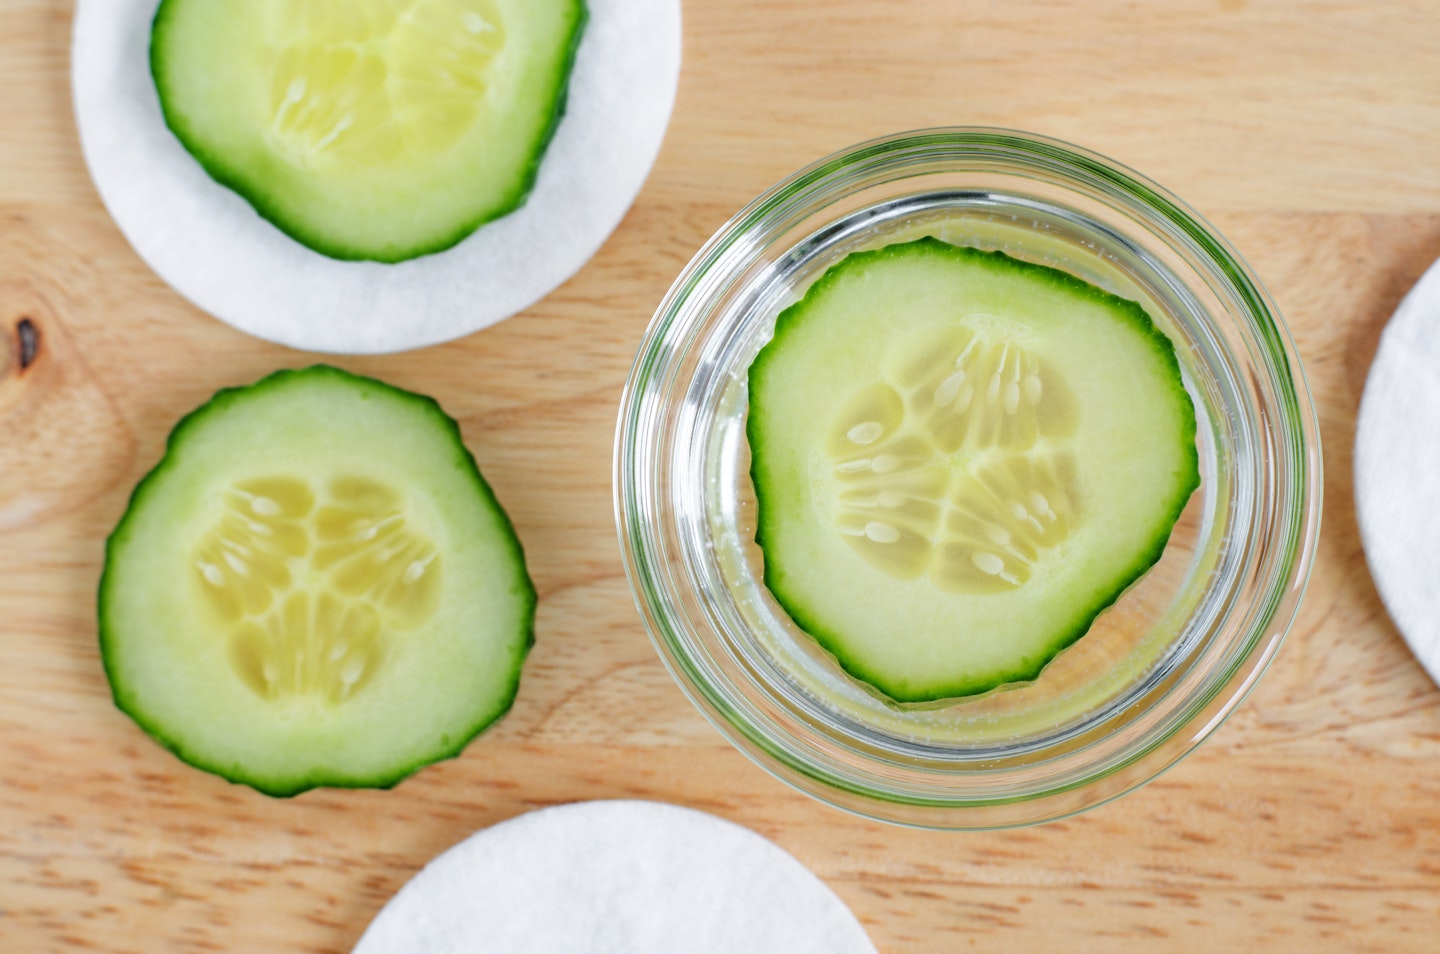 Wear cucumber patches